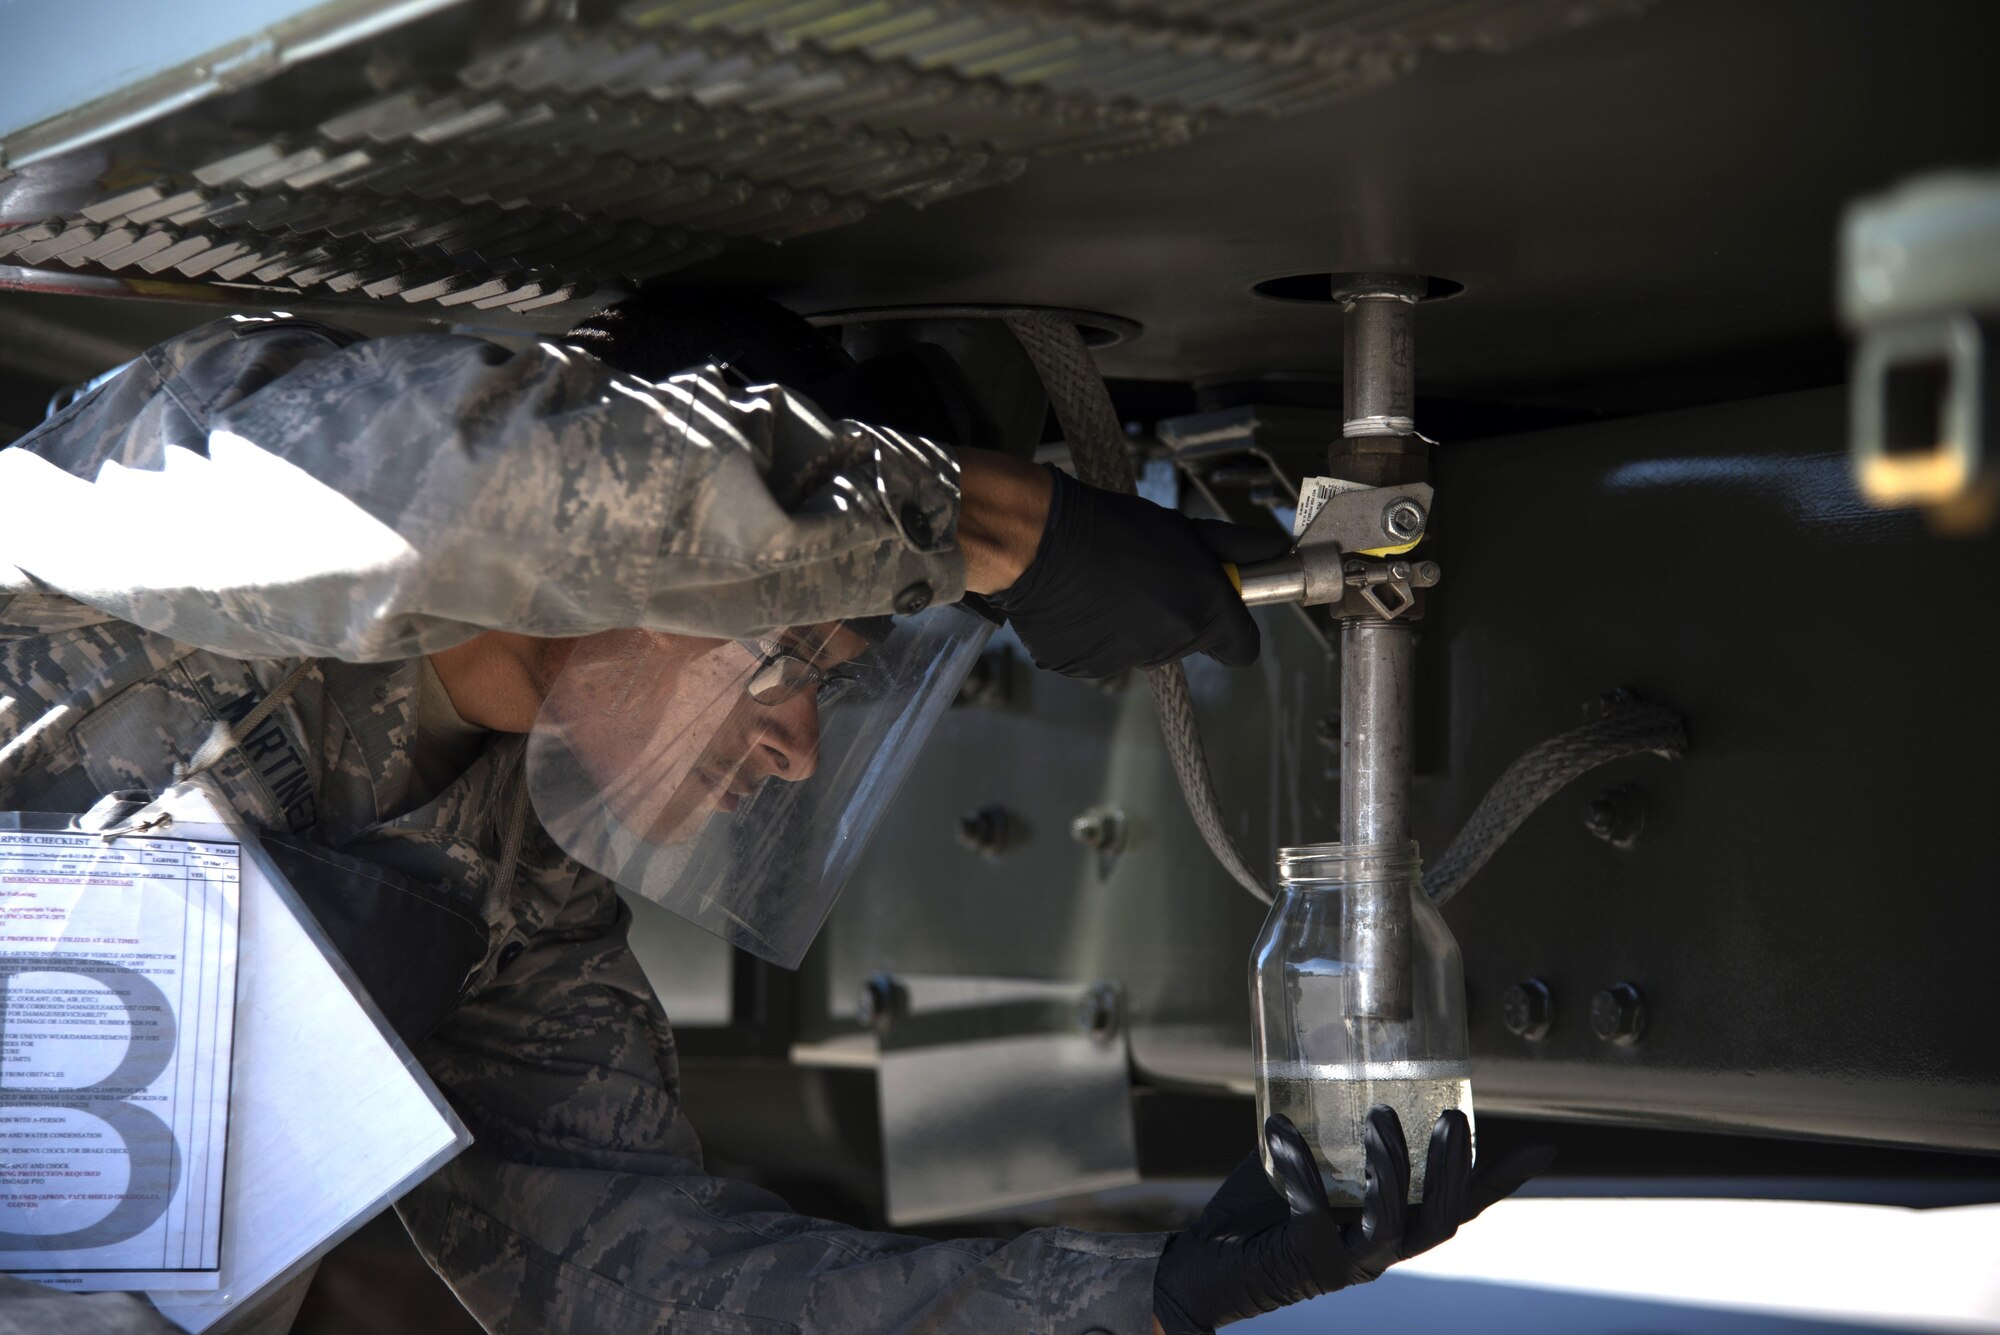 U.S. Air Force Airman 1st Class Joshua Martinez, a fuels distribution operator assigned to the 6th Logistics Readiness Squadron, performs a routine check on a fuels truck at MacDill Air Force Base Fla., Nov. 2, 2017.